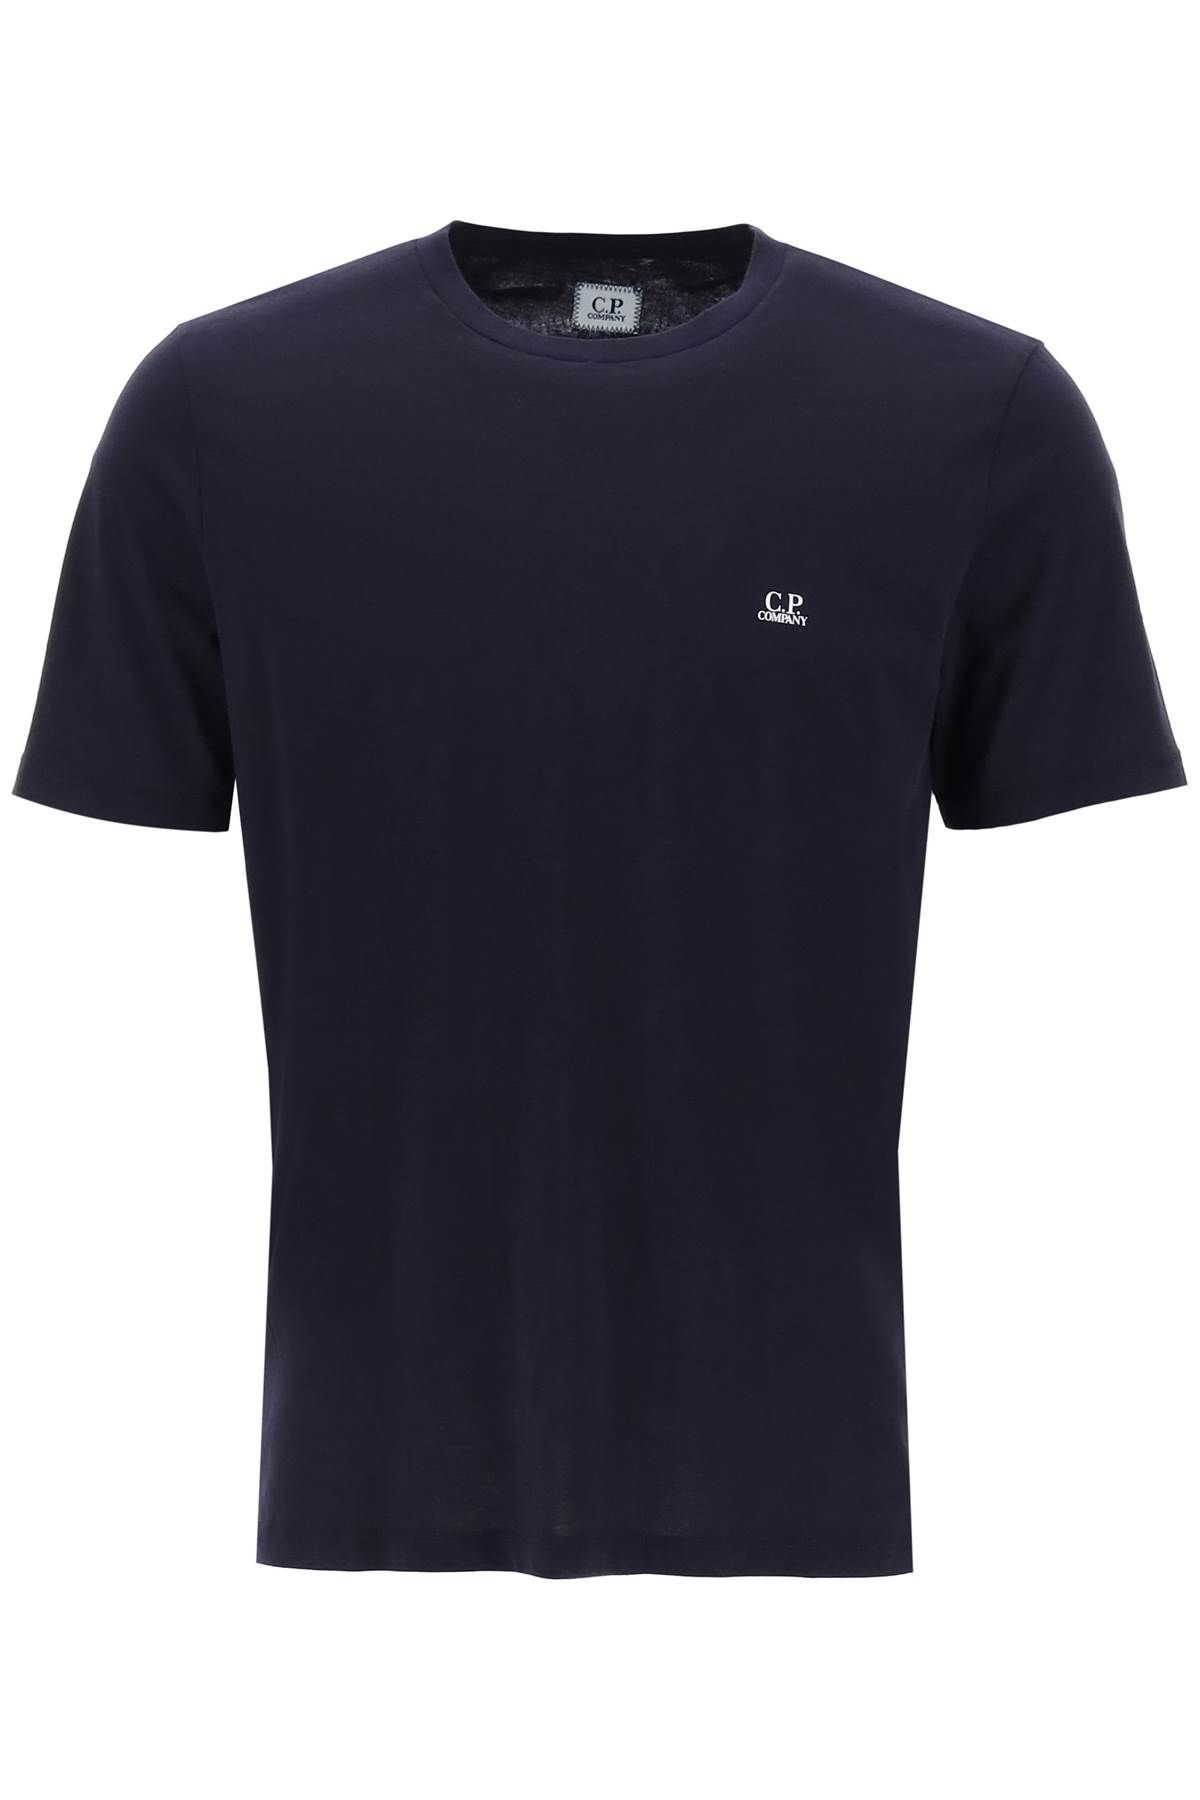 C.p. Company Goggle Print T-shirt In Blue